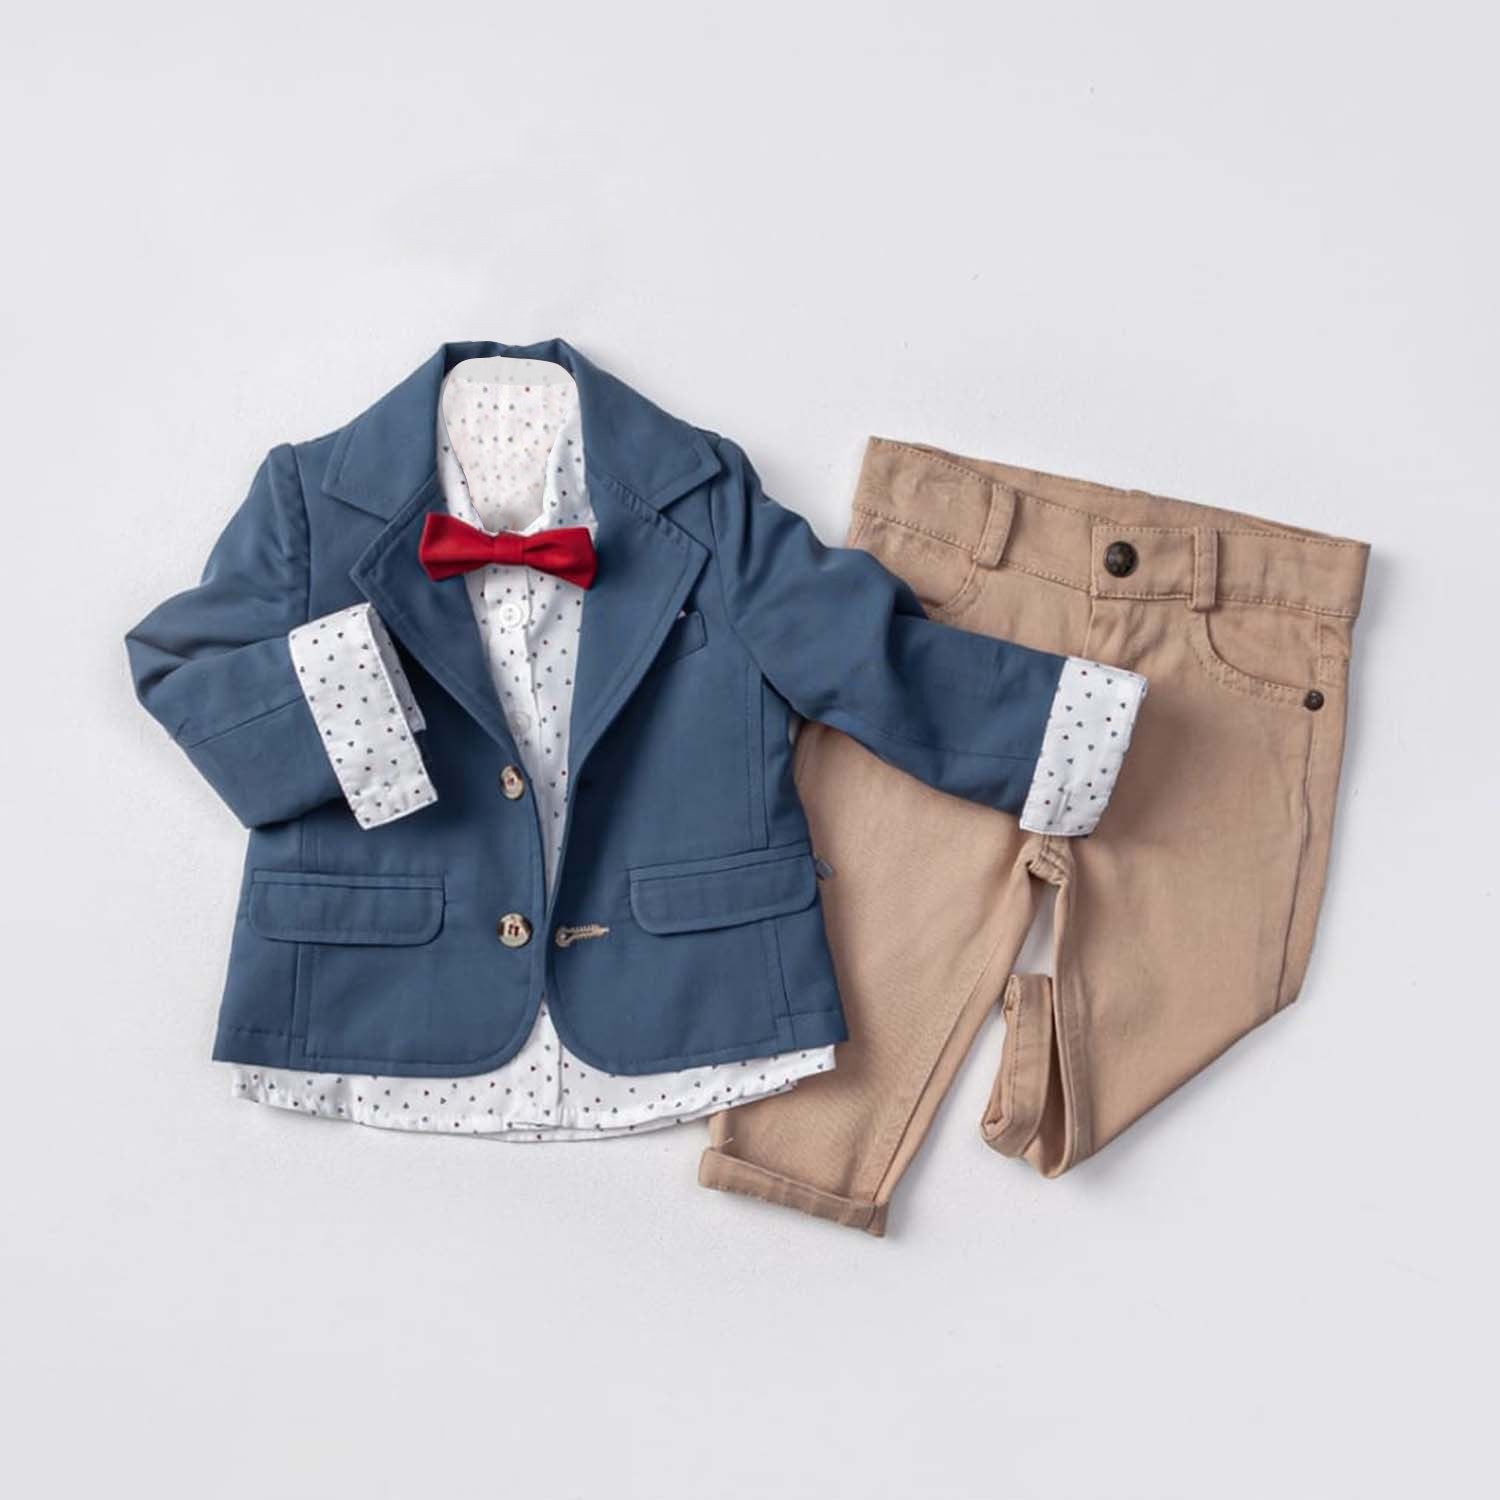 Infant and Toddler Boy's 3-Piece Suit with Fully LIned Jacket, Pants and Button Up Shirt